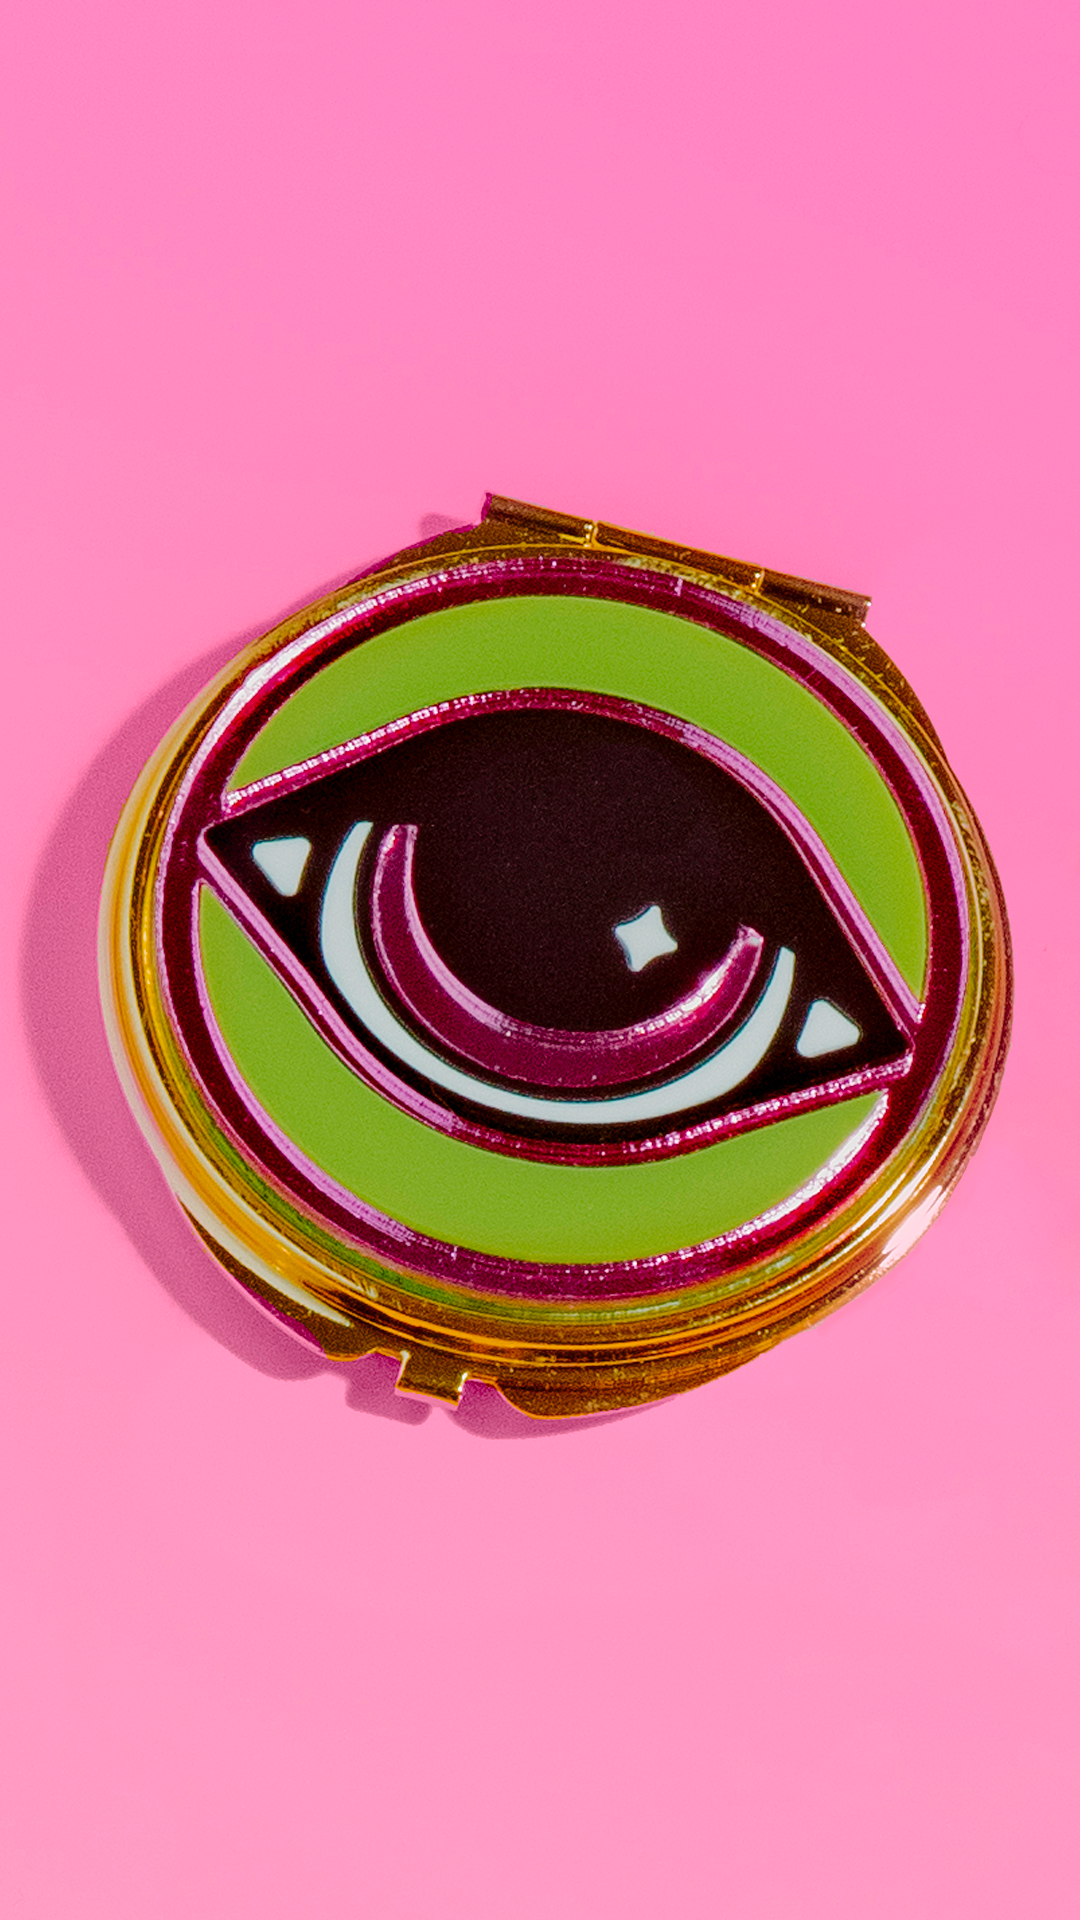 Compact Mirror - All Seeing Eye